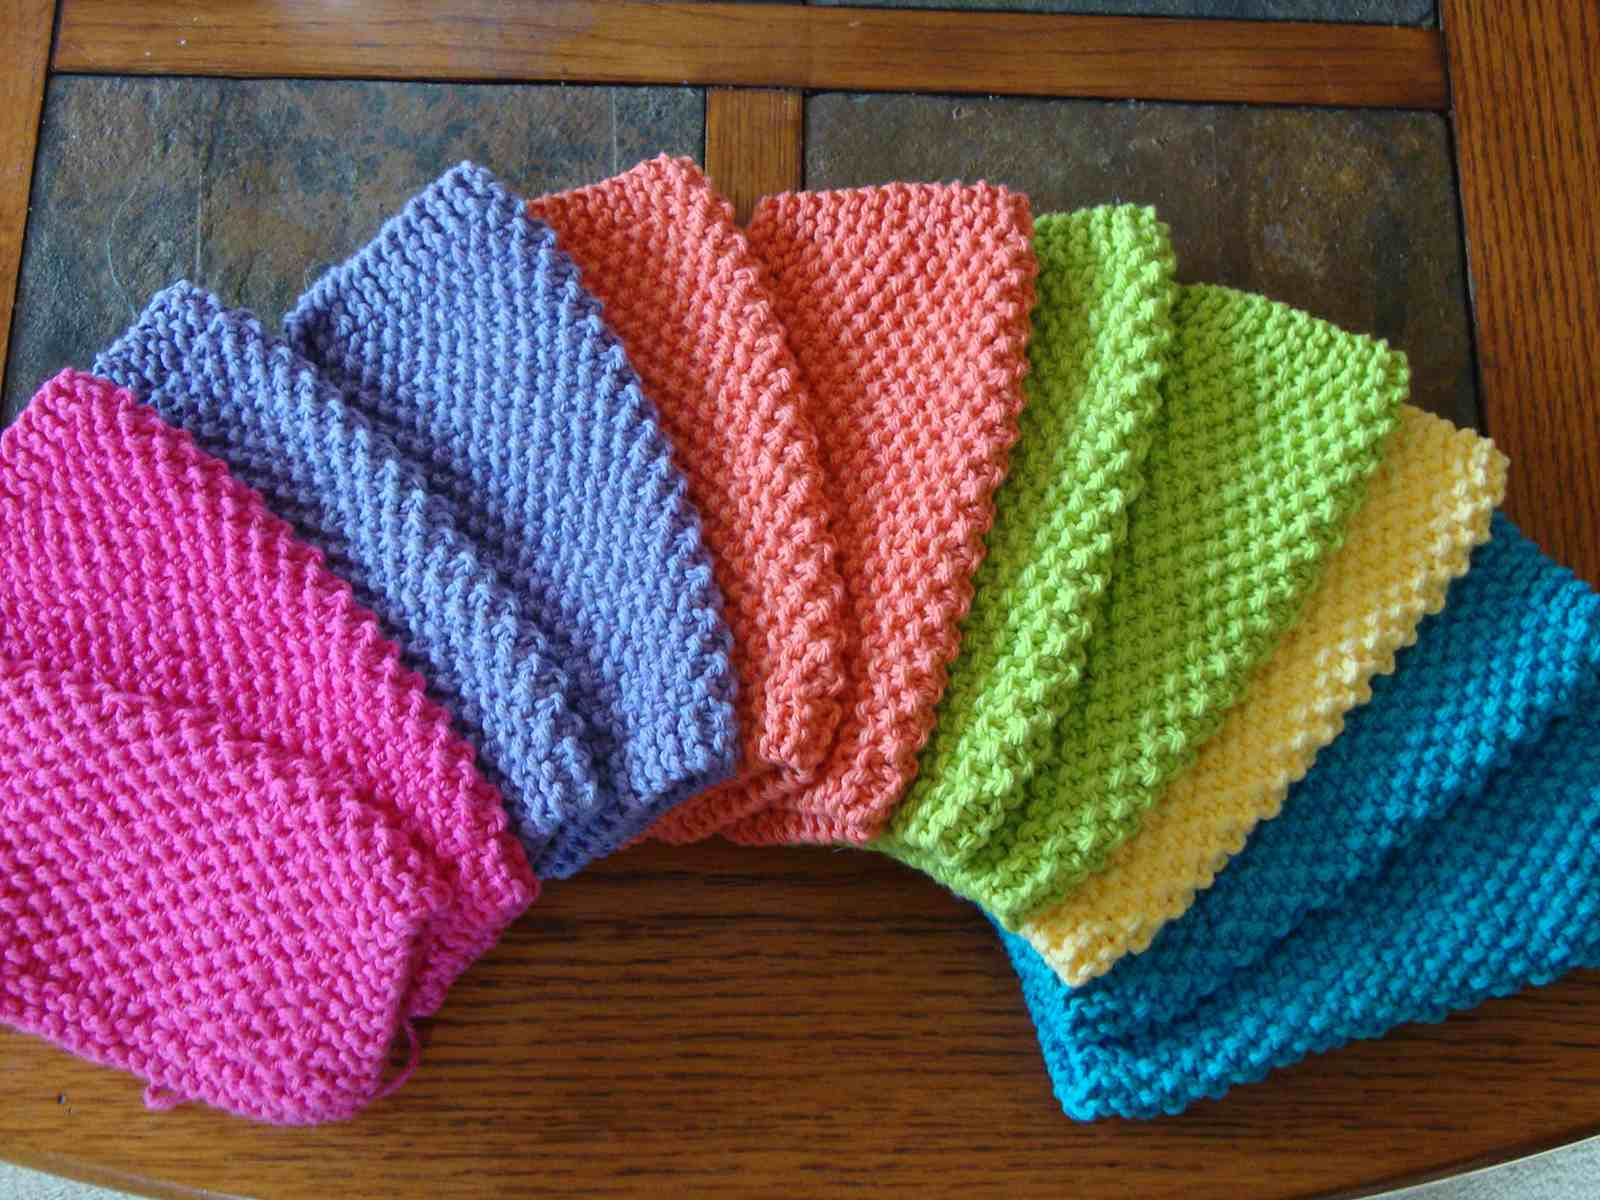 Free Knitted Cotton Dishcloth Patterns 10 Knit Dishcloth Patterns For Beginners